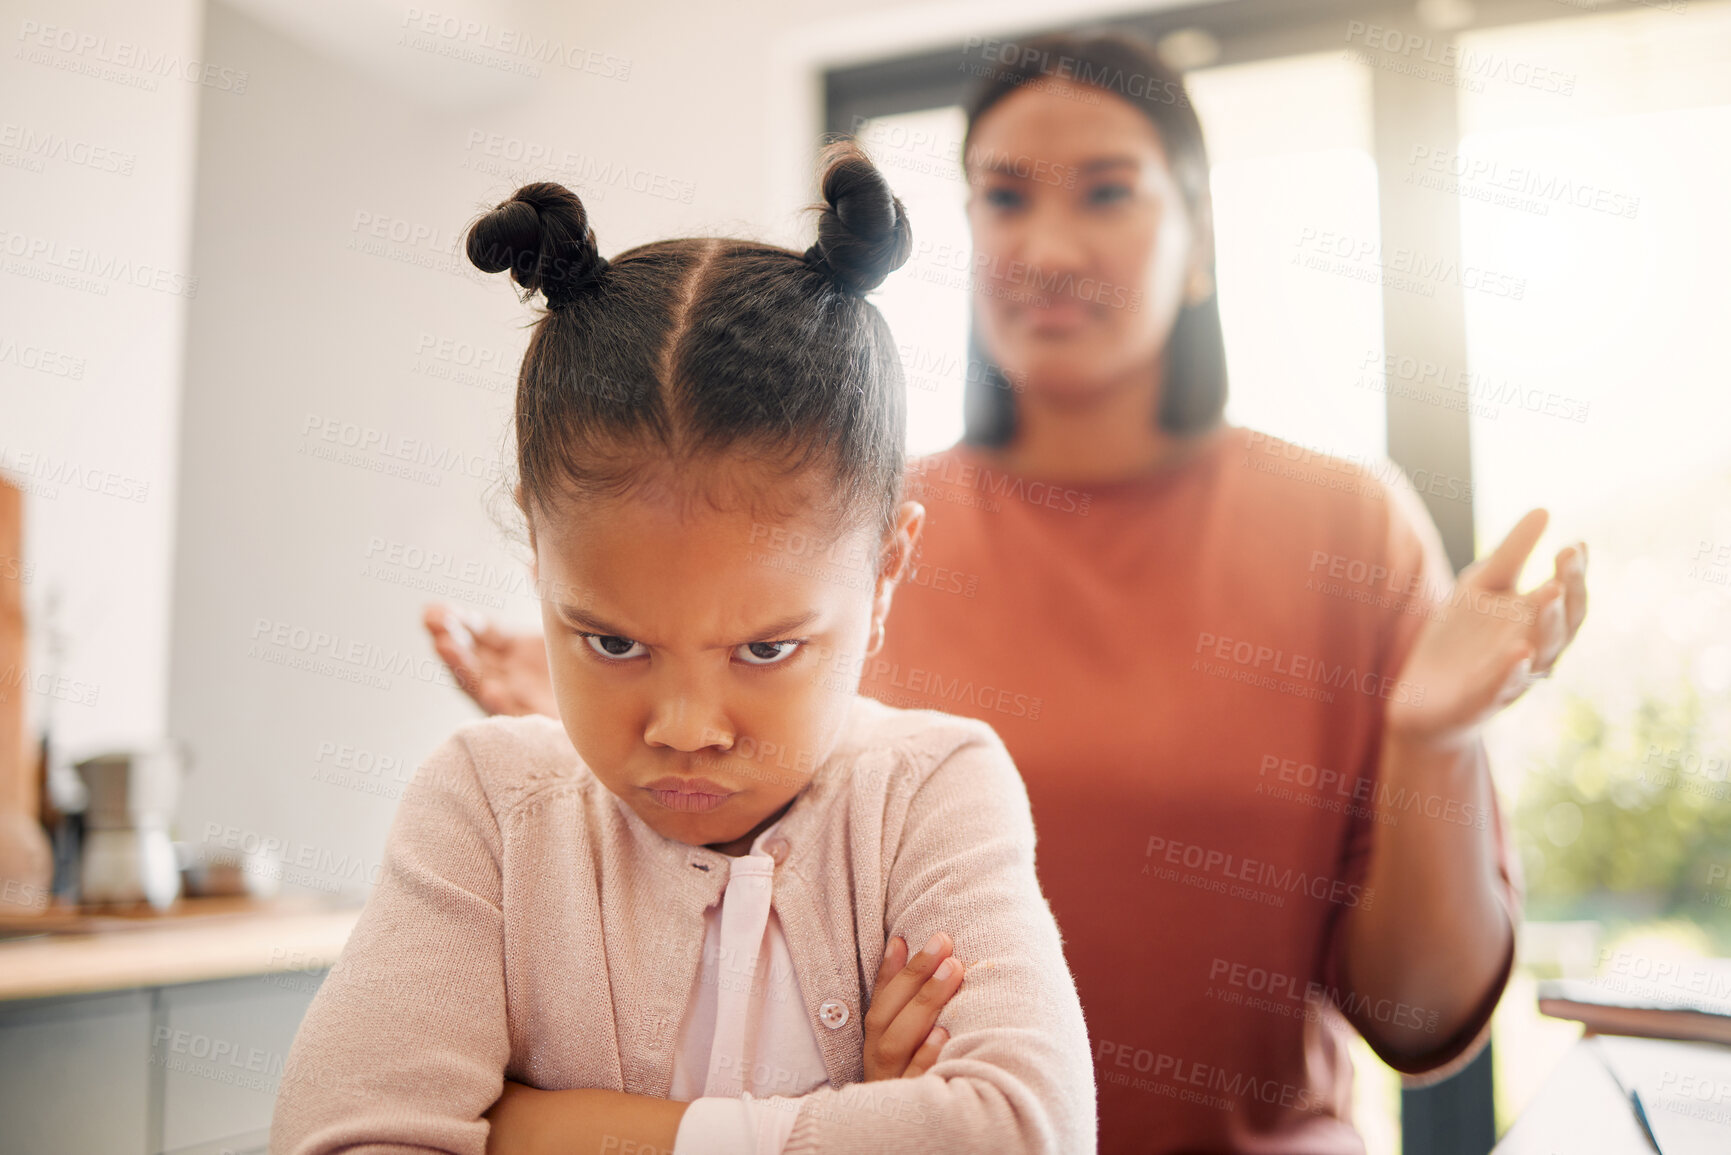 Buy stock photo Angry little girl, unhappy and upset after fight or being scolded by mother, frowning with attitude and arms crossed. Naughty child looking offended with stressed single parent in background.